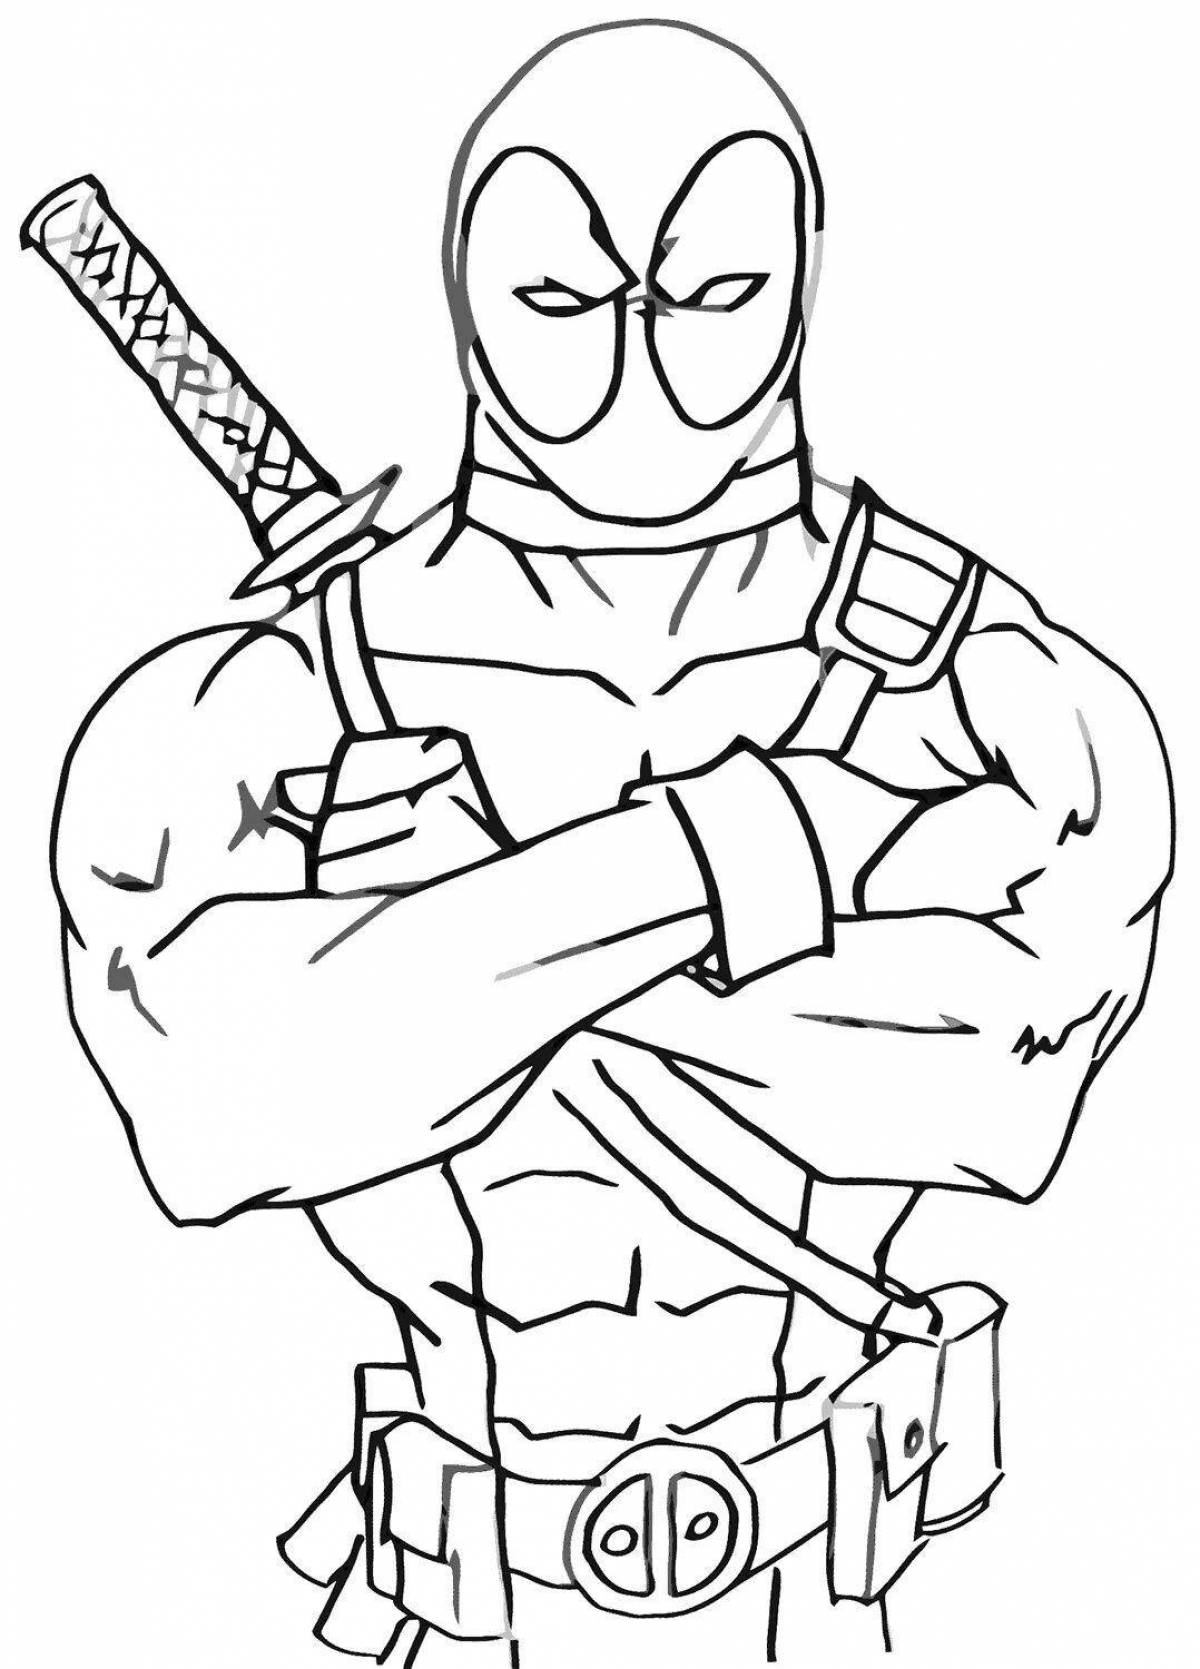 Gorgeous deadpool and spiderman coloring pages for kids